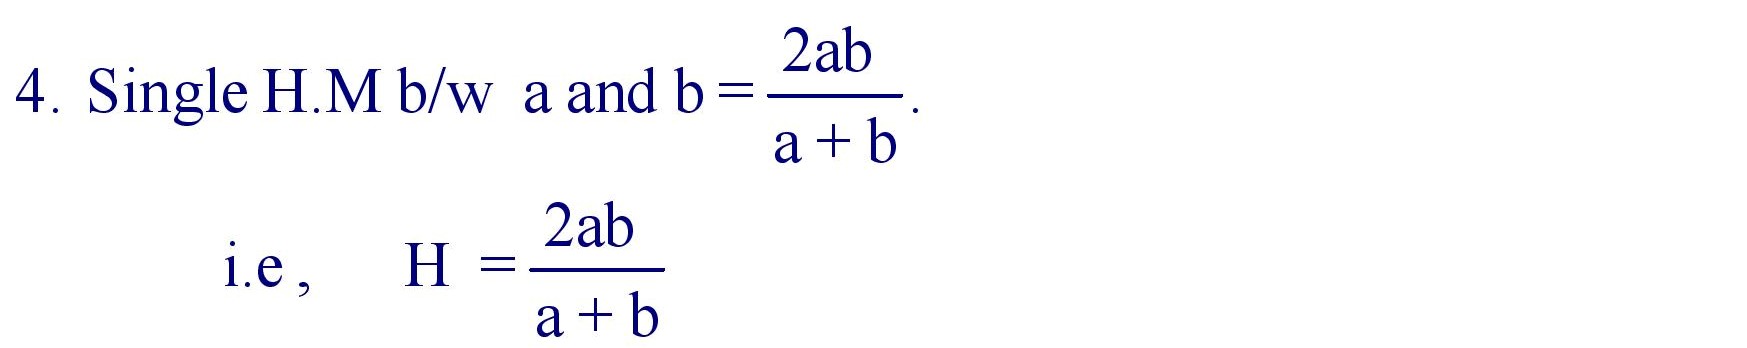 Single H.M between given two numbers a and b